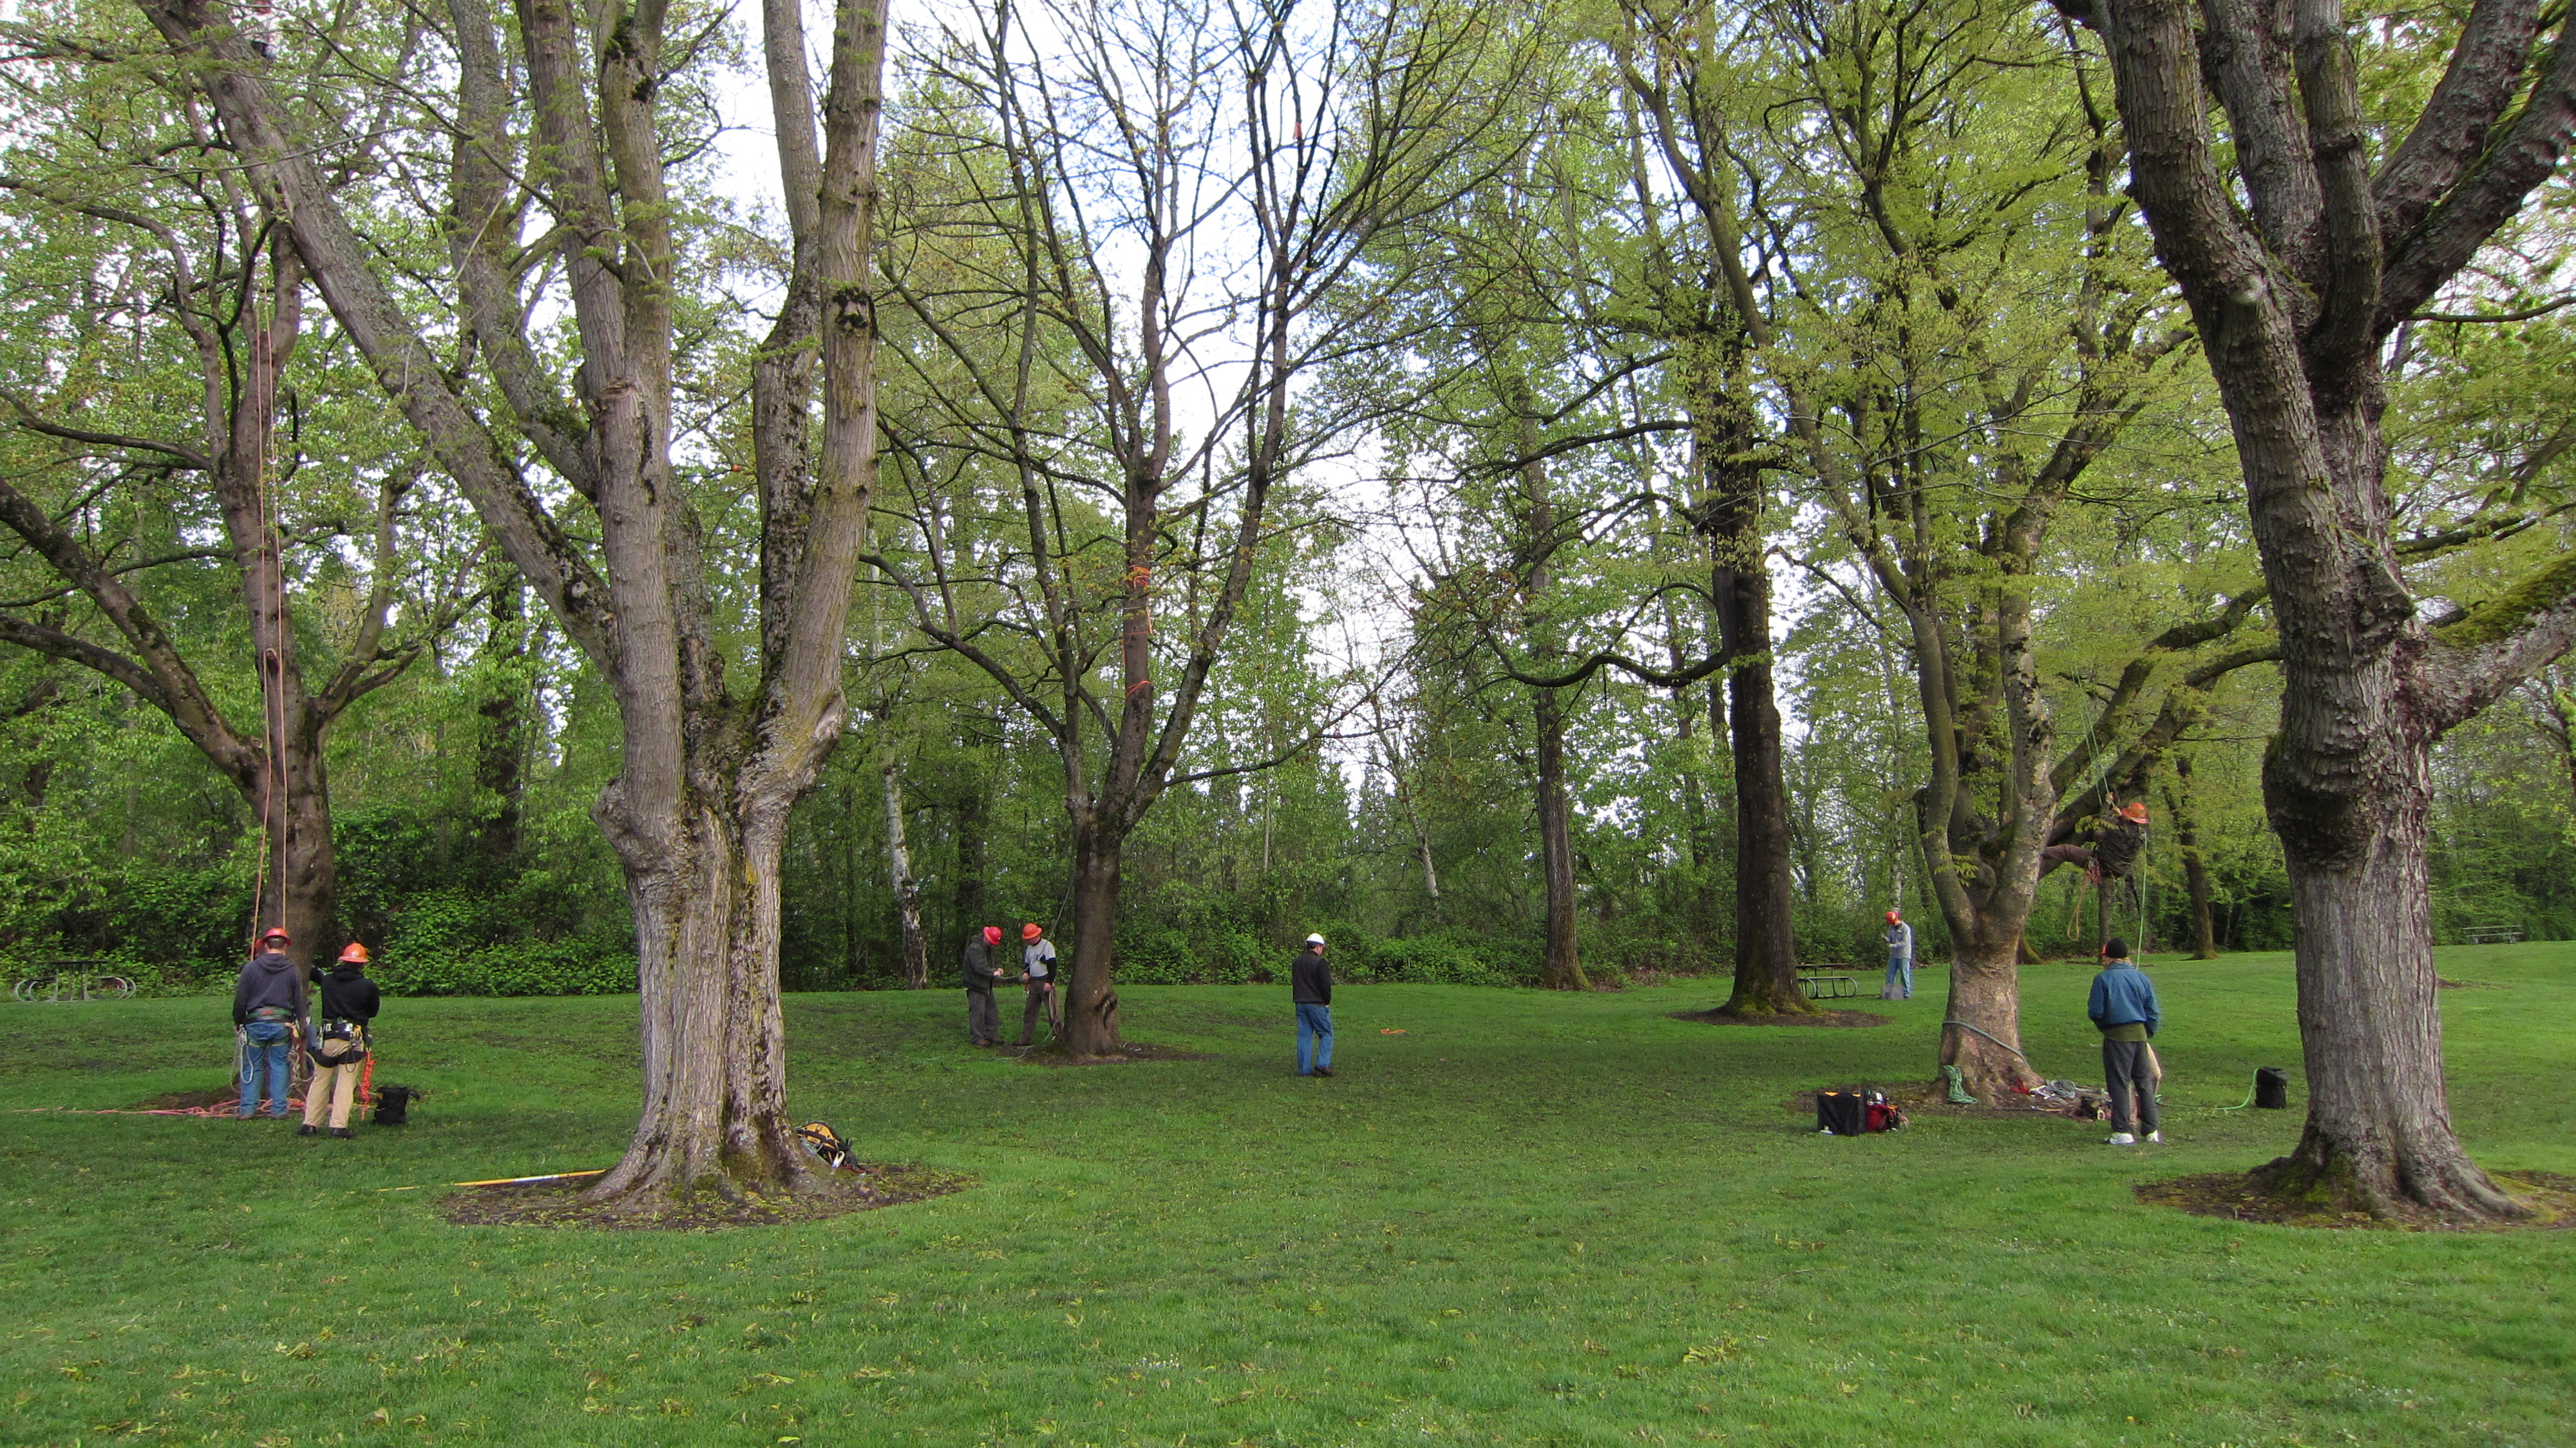 Bloom Day April 2013 – The Trees of East Delta Park | Portland Tree Tour